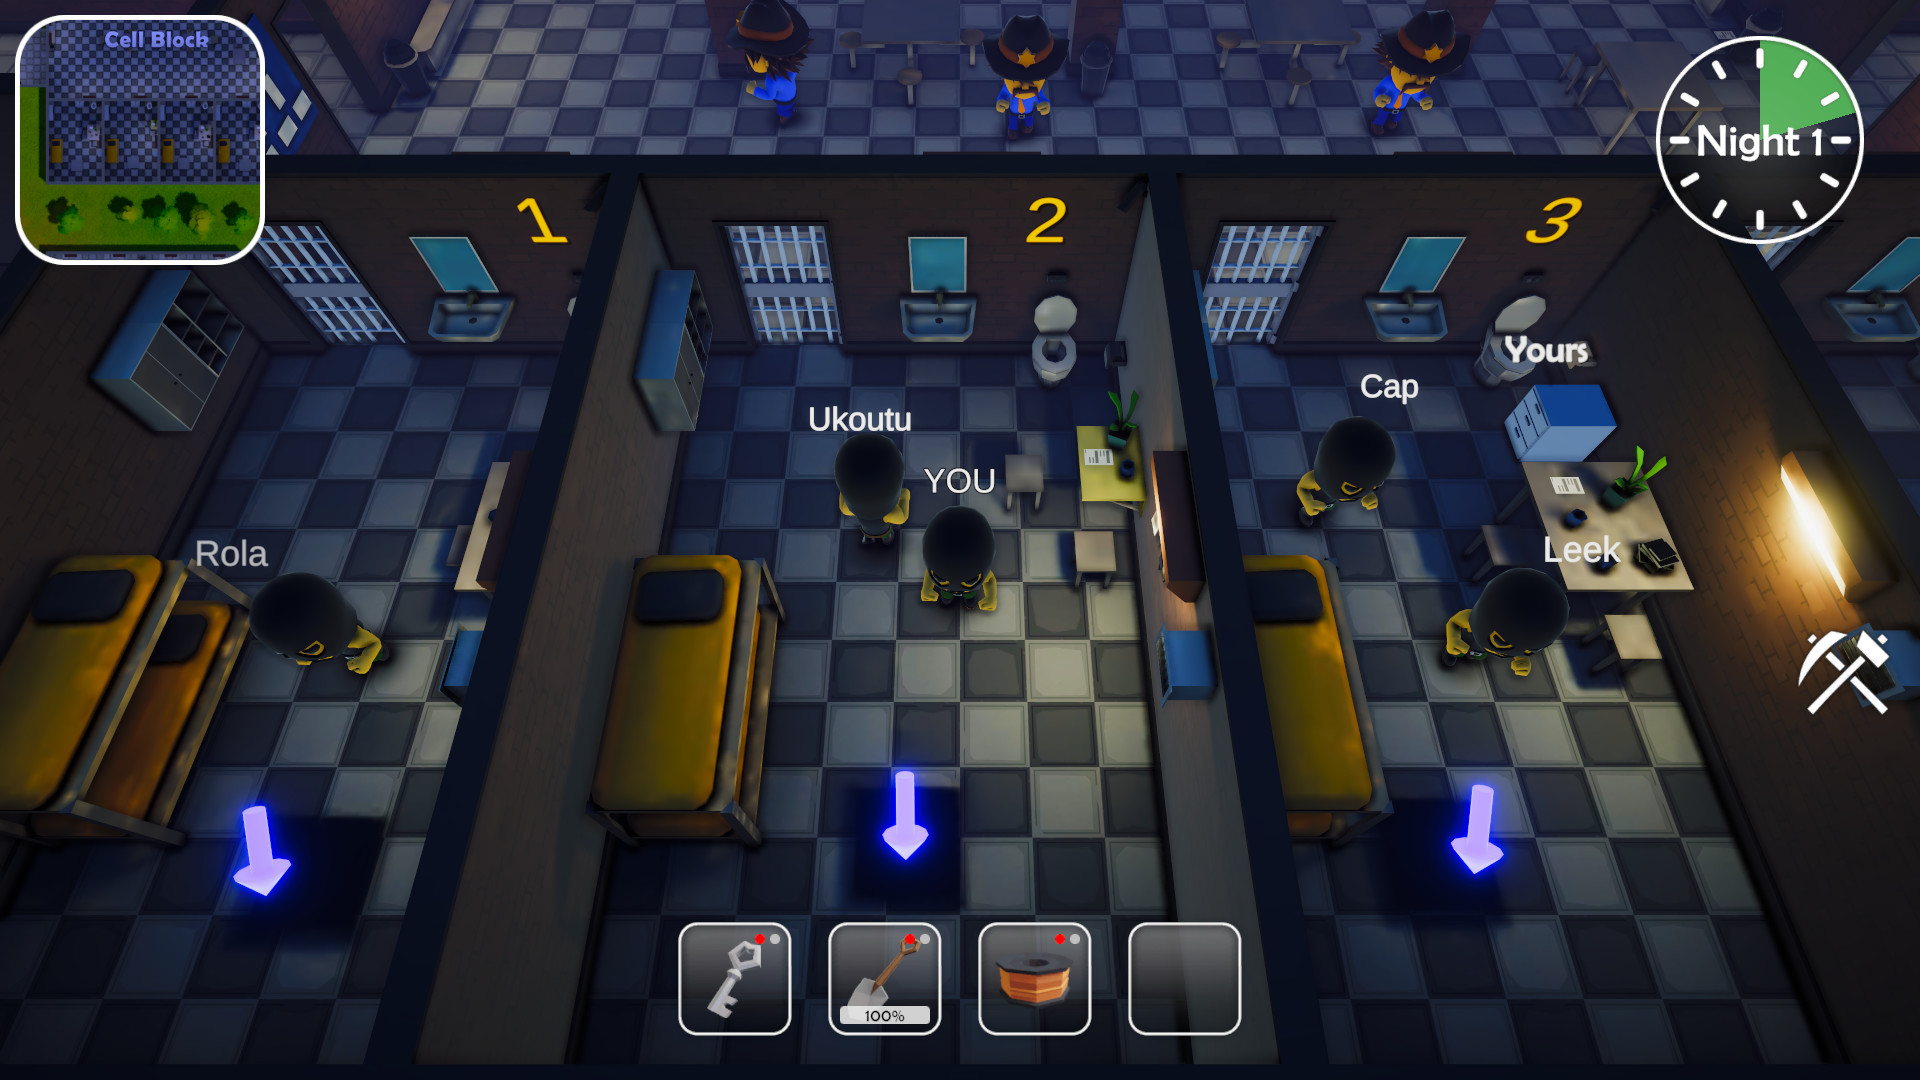 Escape the Prison Game · Play Online For Free ·